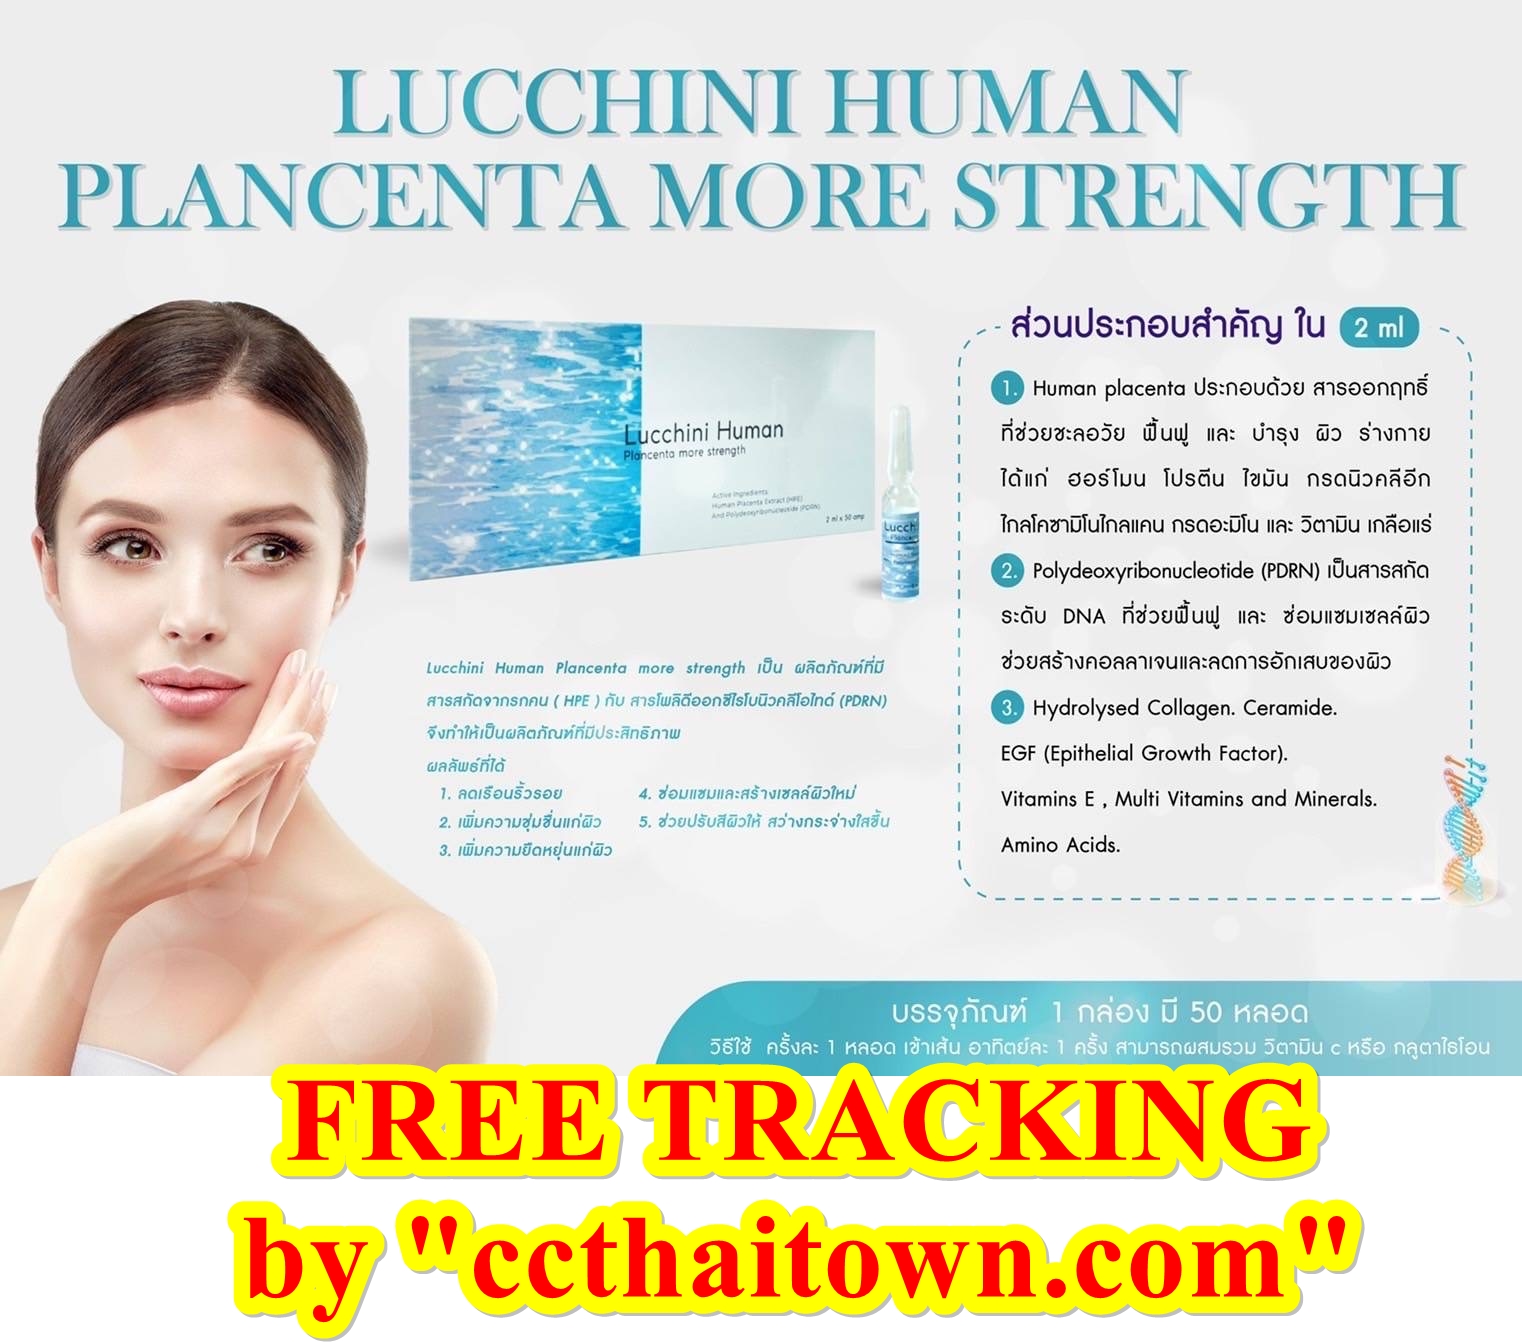 LUCCHINI HUMAN (BLUE) PLACENTA MORE STRENGTH INJECTION by www.ccthaitown.com